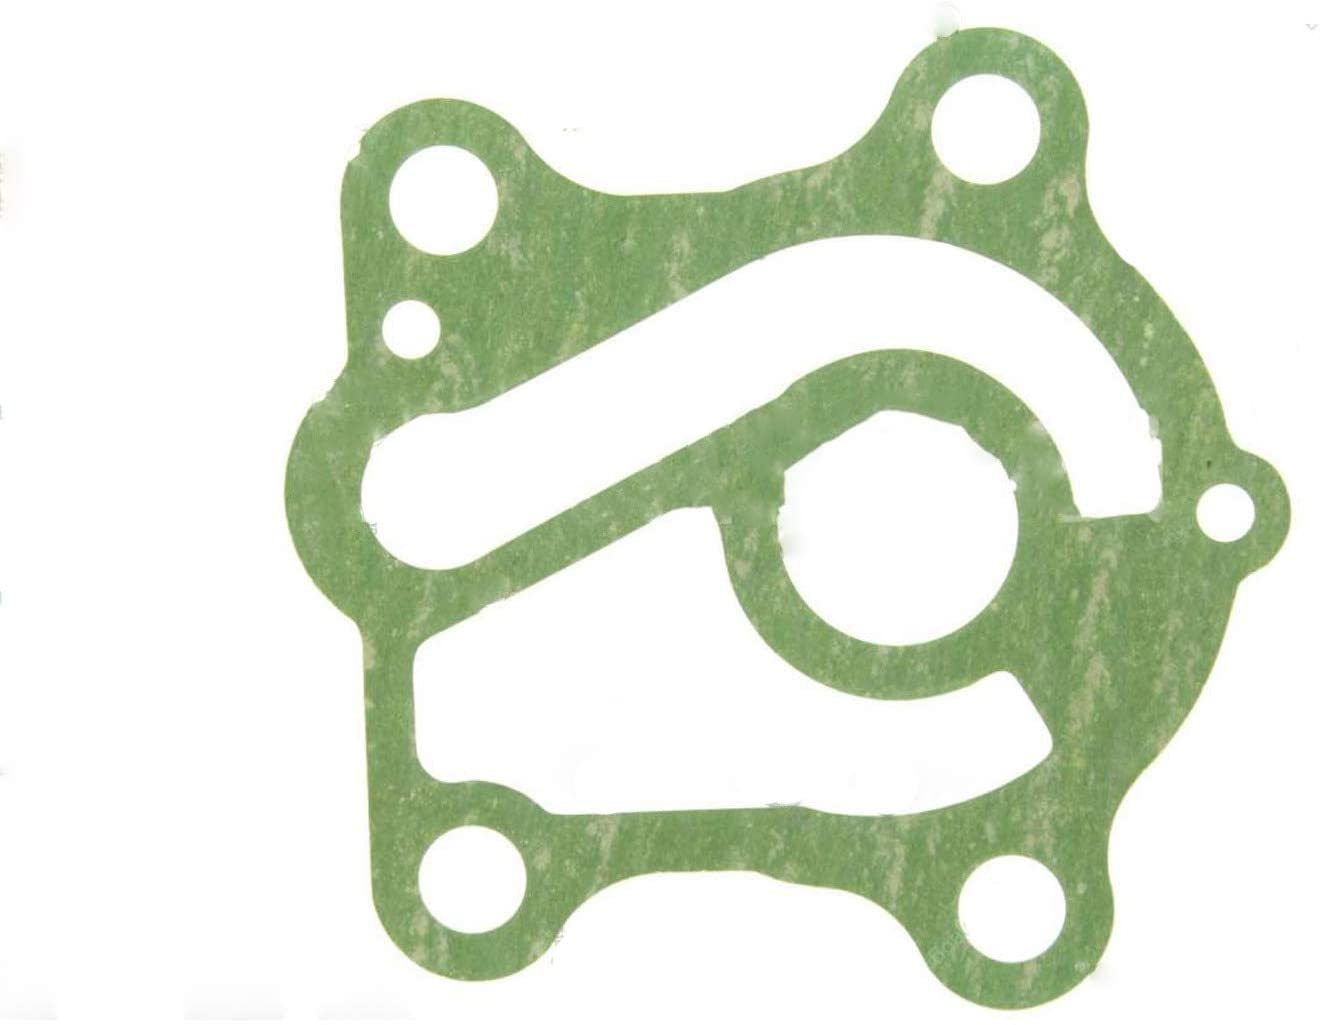 663-44366-00 DAMPER WATER SEAL 2 FOR YAMAHA SEATAN 2 STROKE 60HP OUTBOARD ENGINE SPARE PARTS